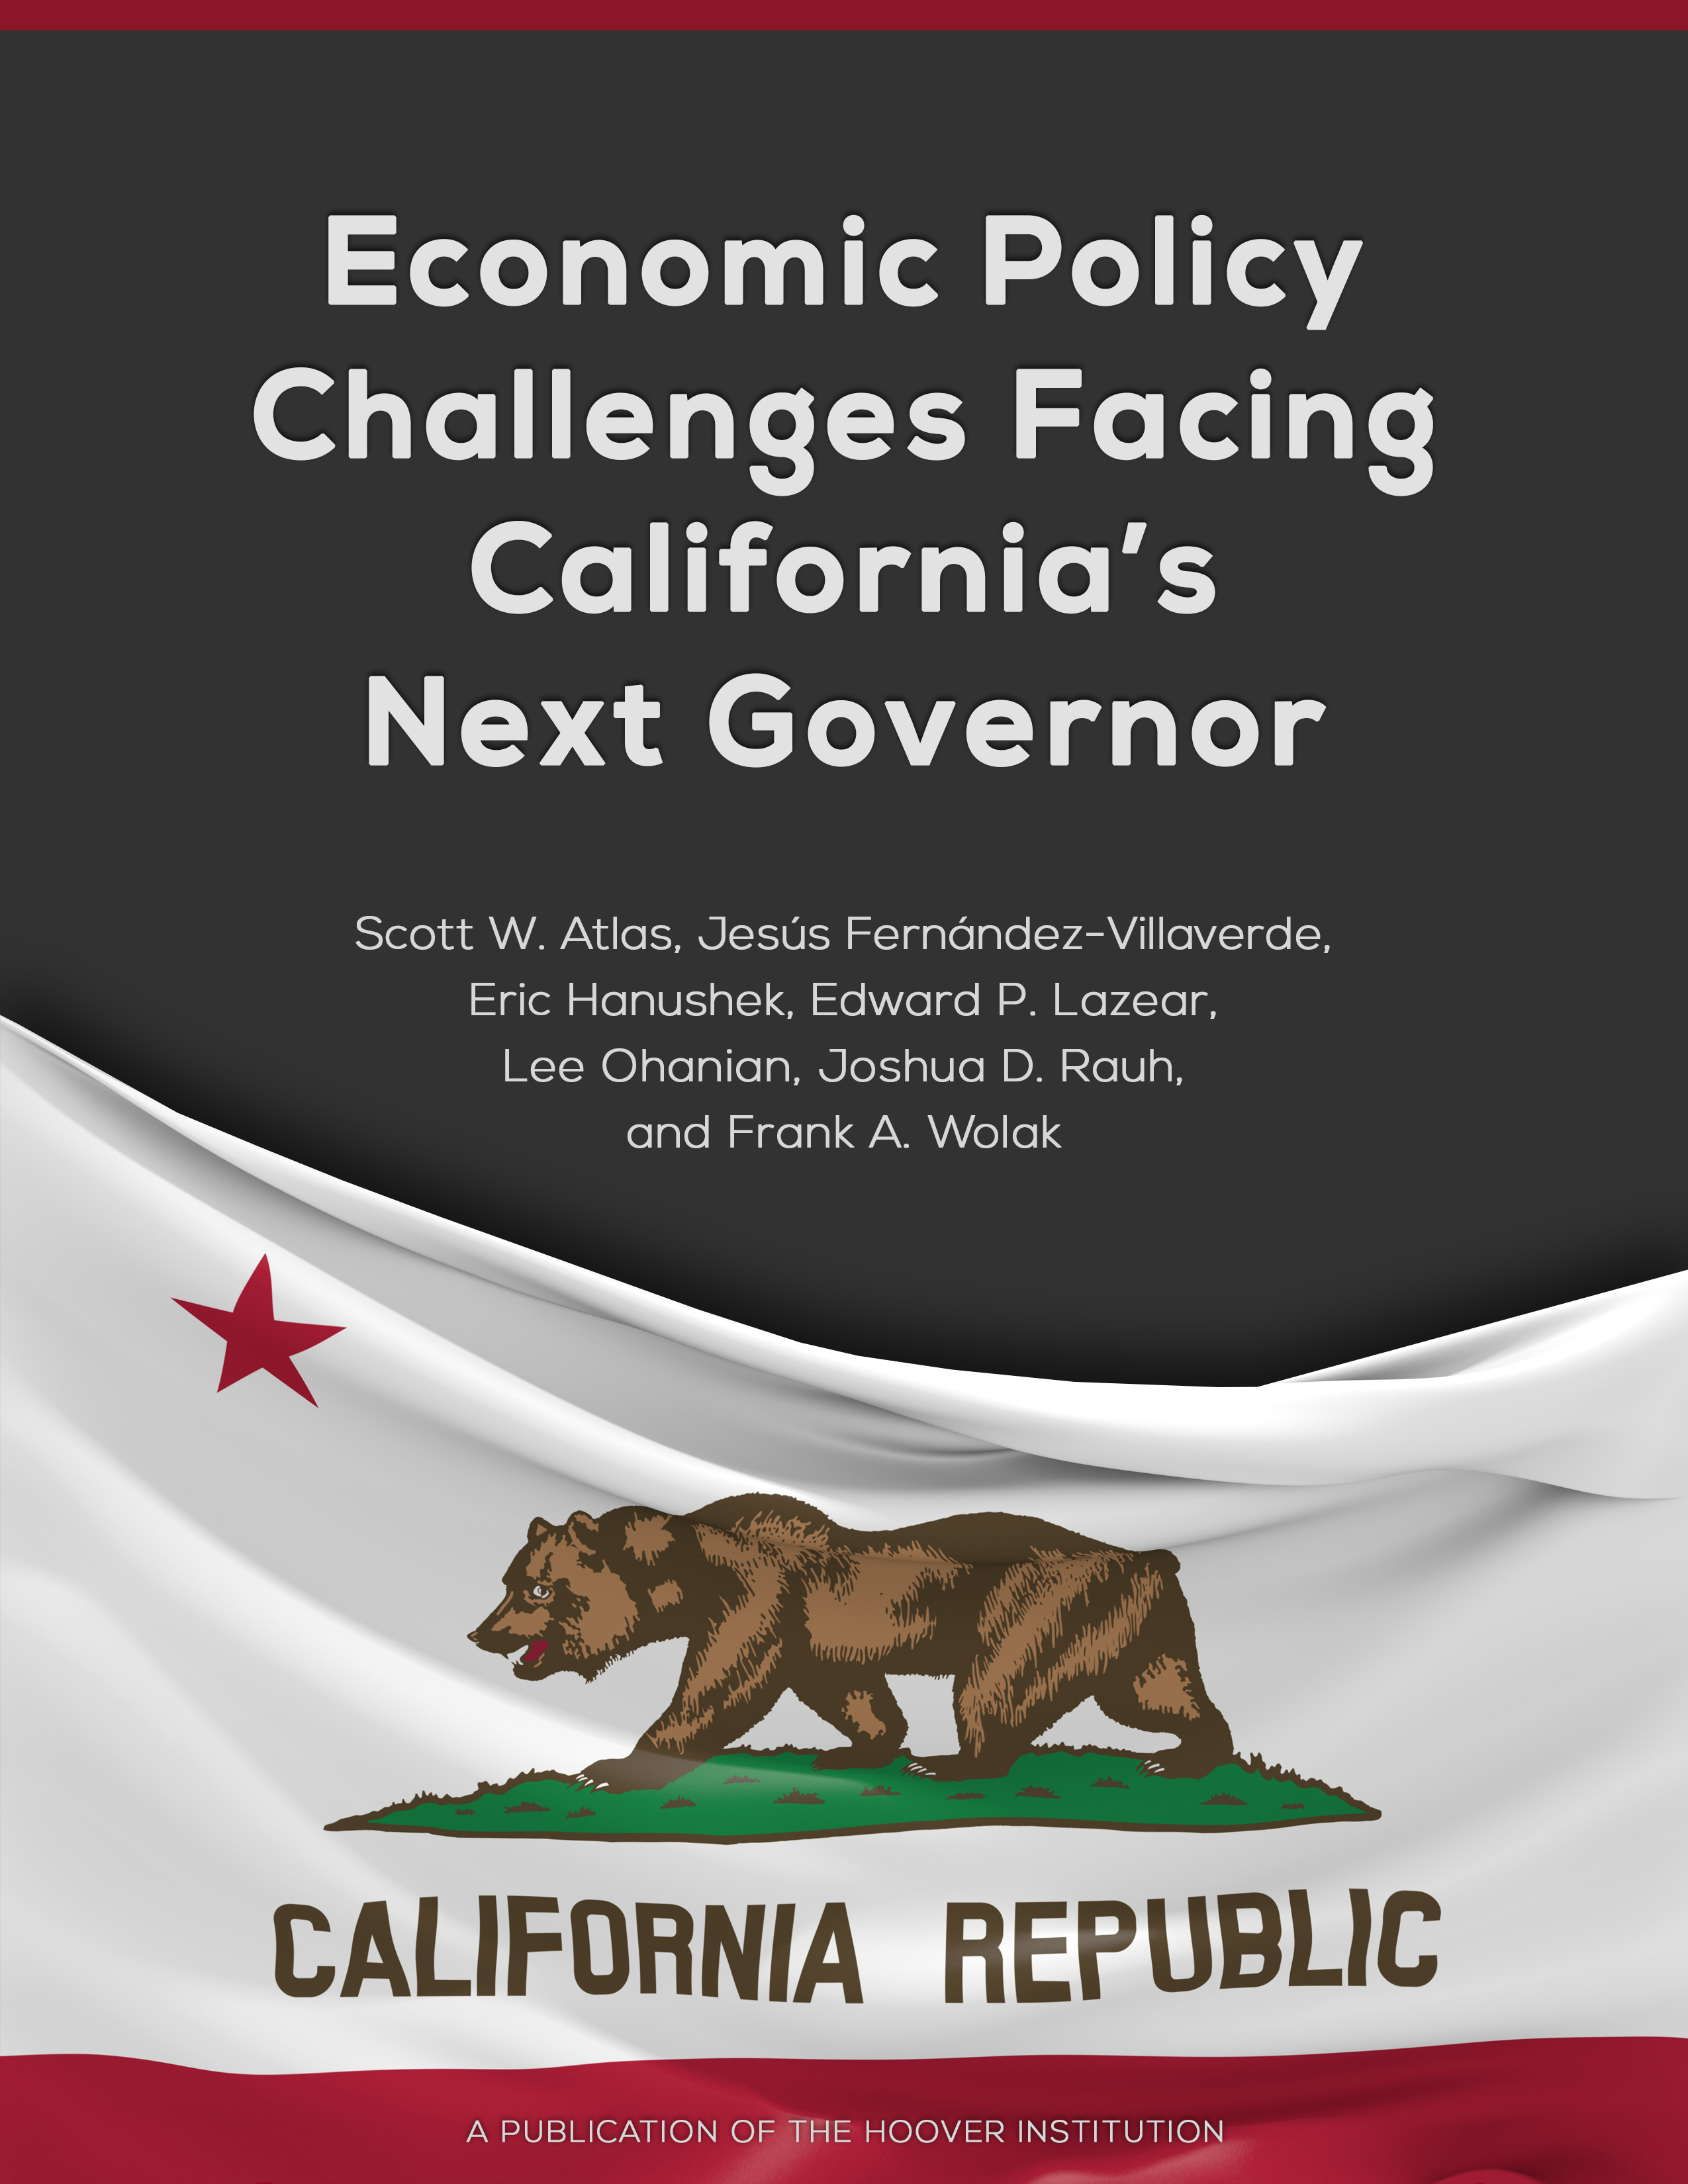 Economic Policy Challenges Facing California’s Next Governor